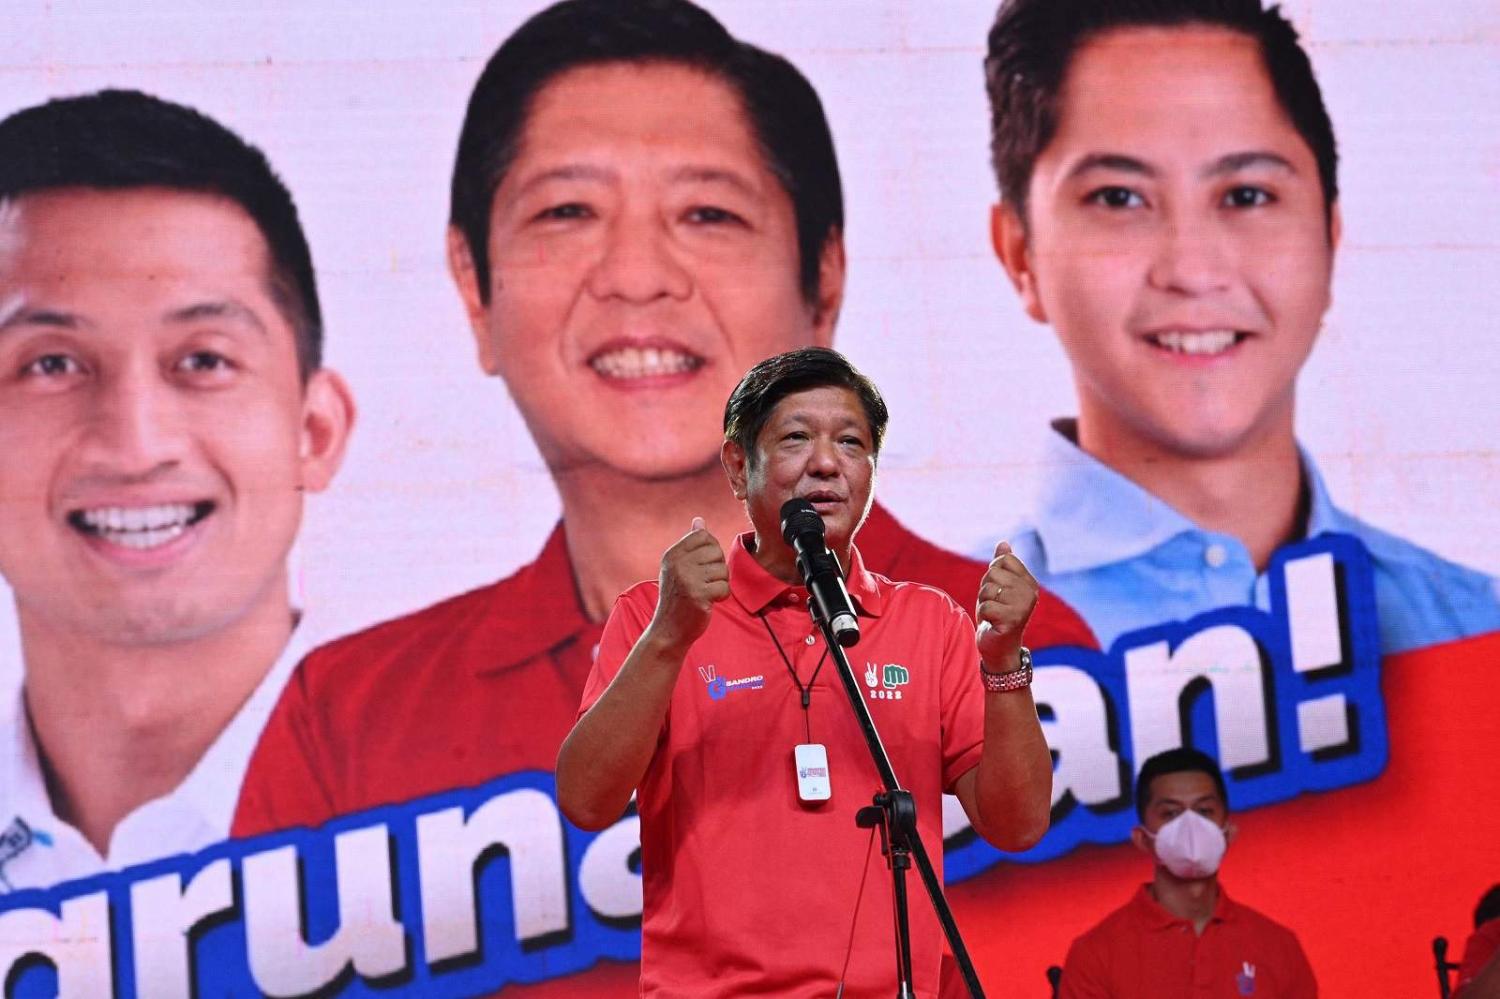 Presidential candidate Bongbong Marcos introduces his son Ferdinand Alexander “Sandro” Marcos during a rally in Laoag City, Ilocos Norte province, 25 March 2022 (Ted Aljibe/AFP via Getty Images)